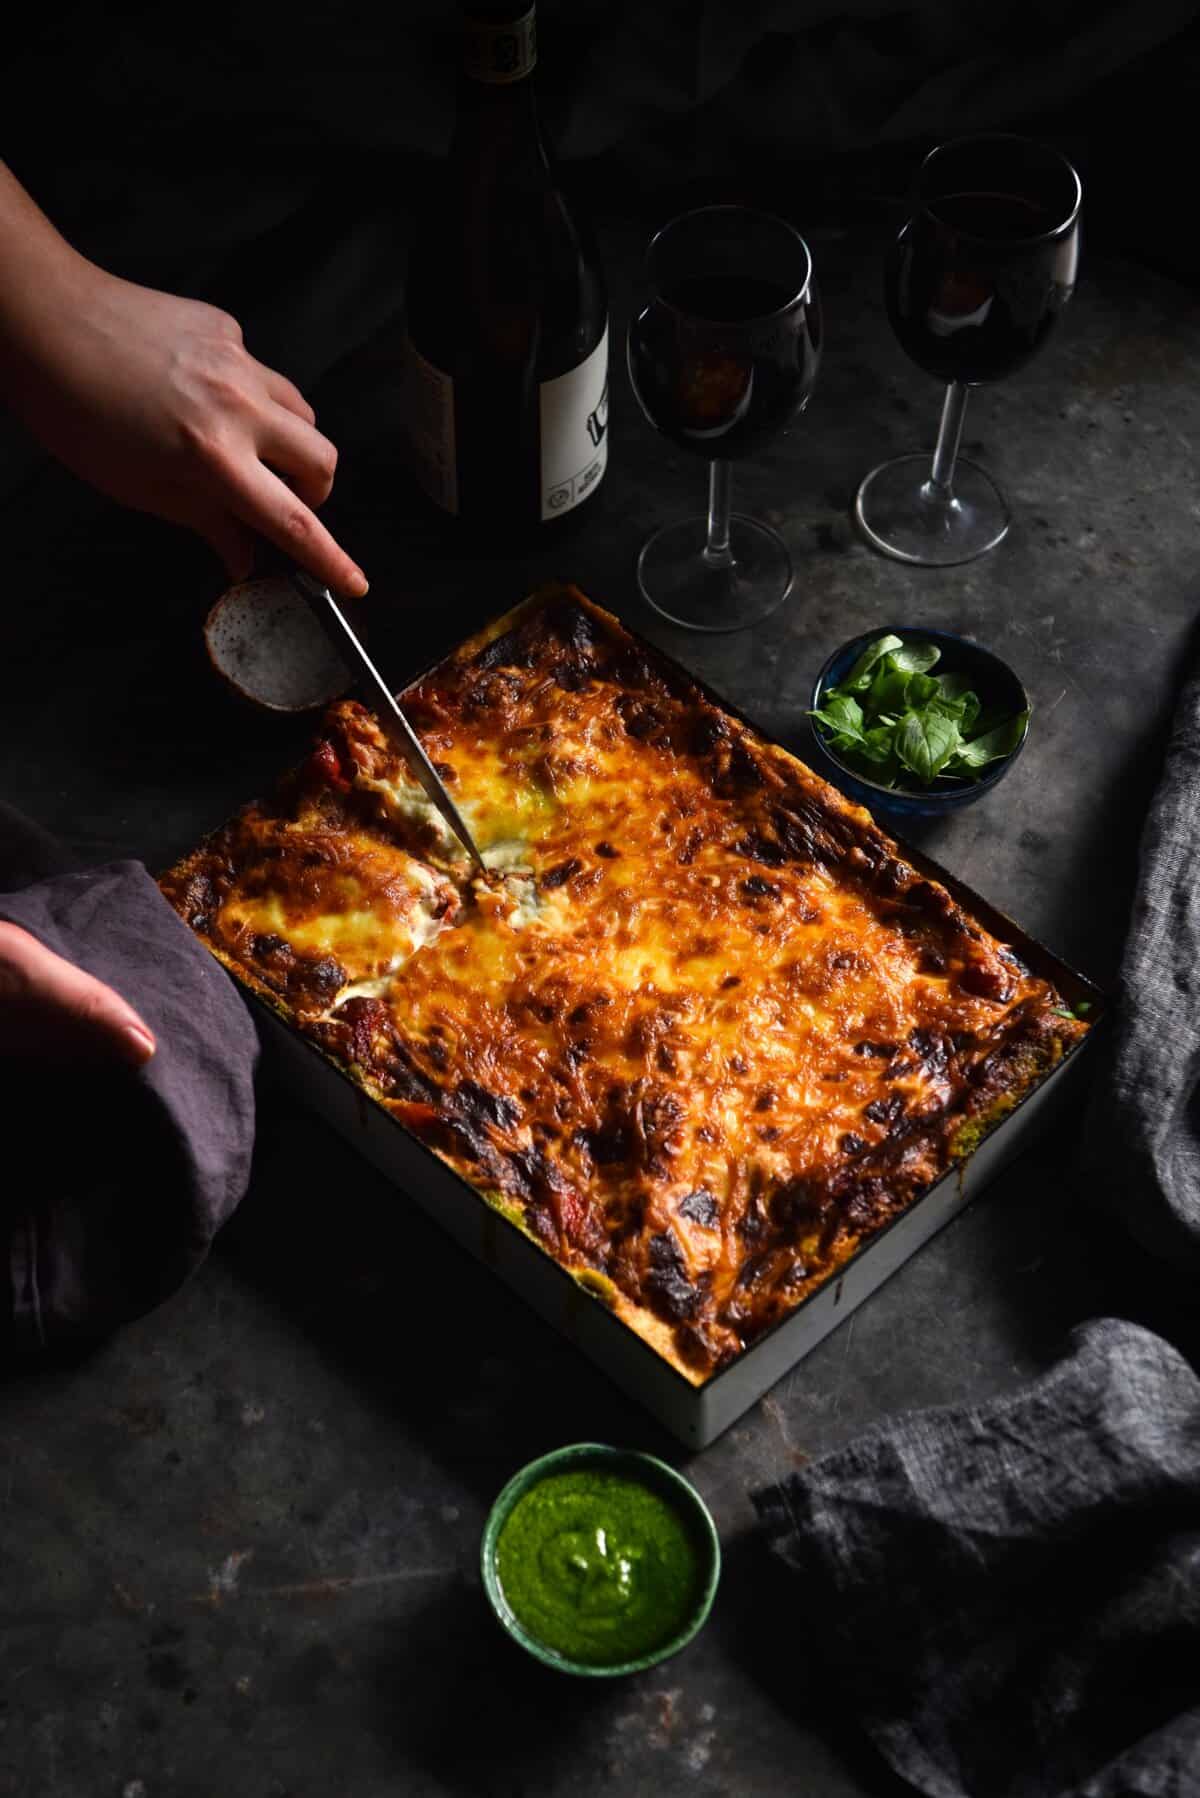 A moody image of a gluten free vegetarian and low FODMAP lasagne on a dark steel mottled backdrop. Hands emerge from the left side of the image to slice into the lasagne. It is surrounded by wine glasses and small pinch pots of herbs. 